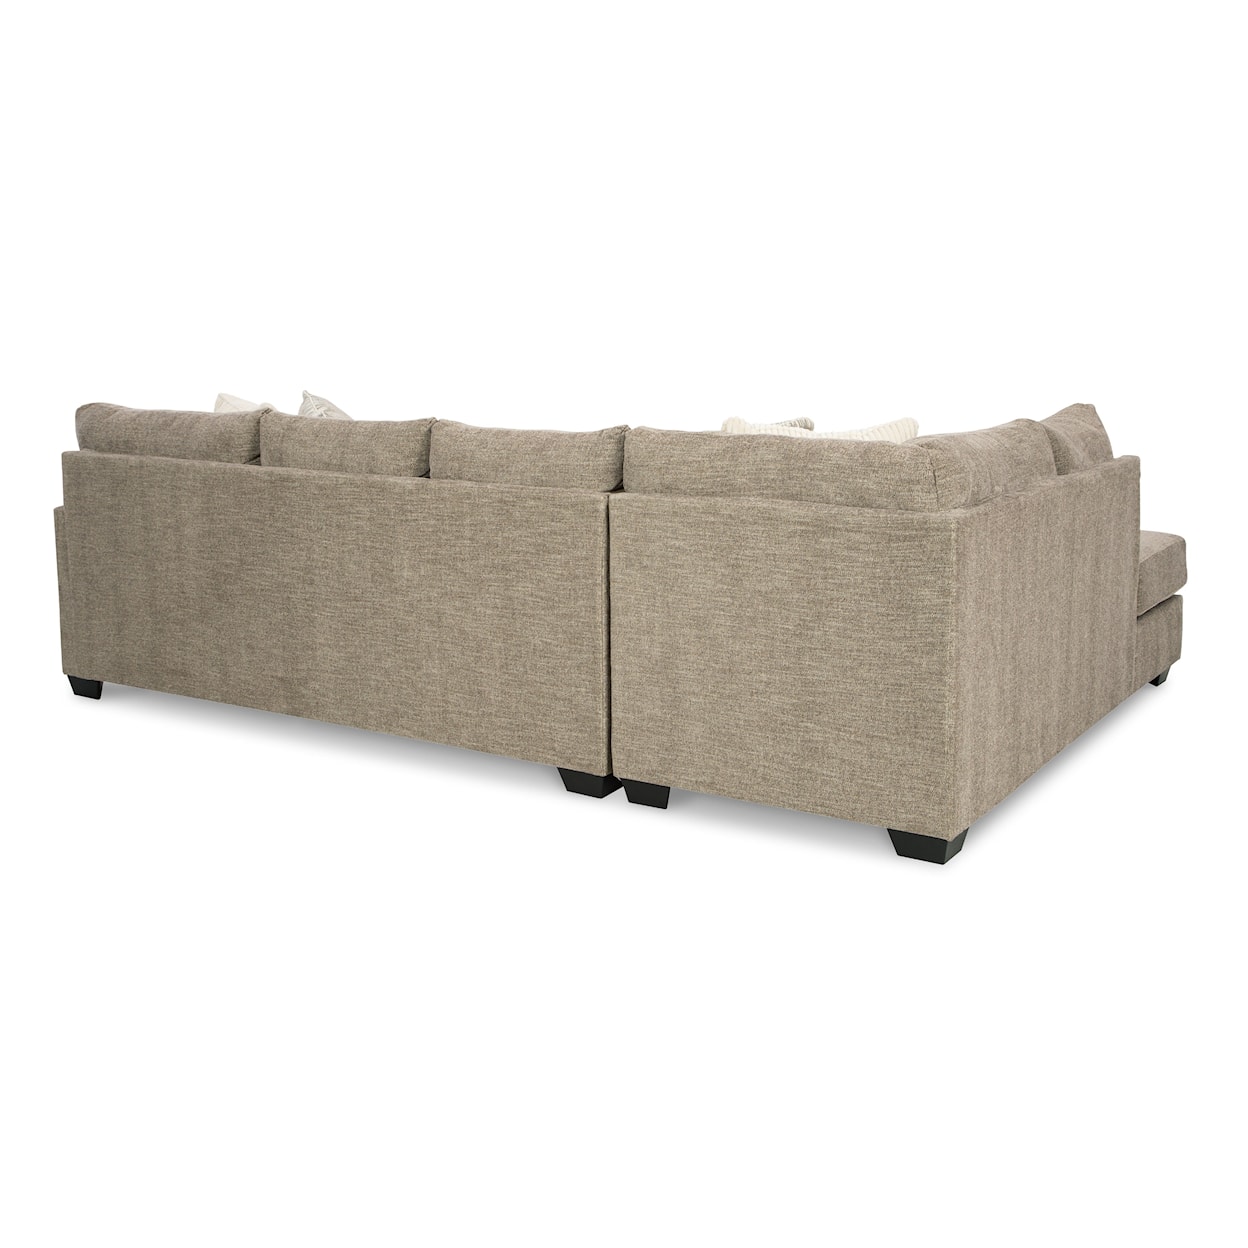 Ashley Furniture Signature Design Creswell 2-Piece Sectional with 2 Chaises